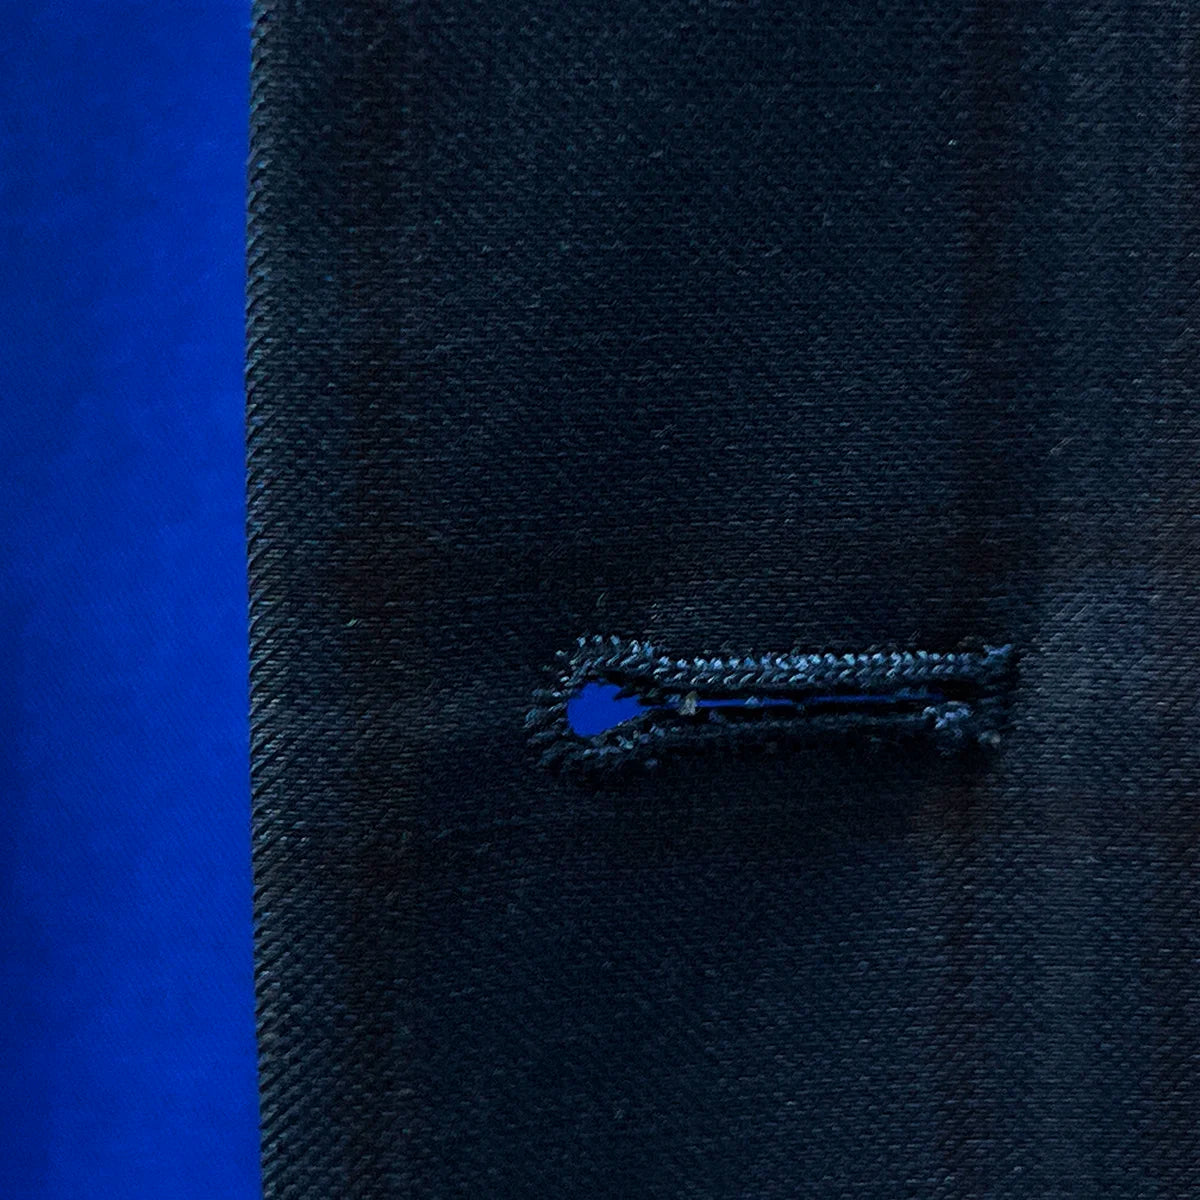 Close-up image showcasing the maroon buttonhole stitching on the sportcoat.